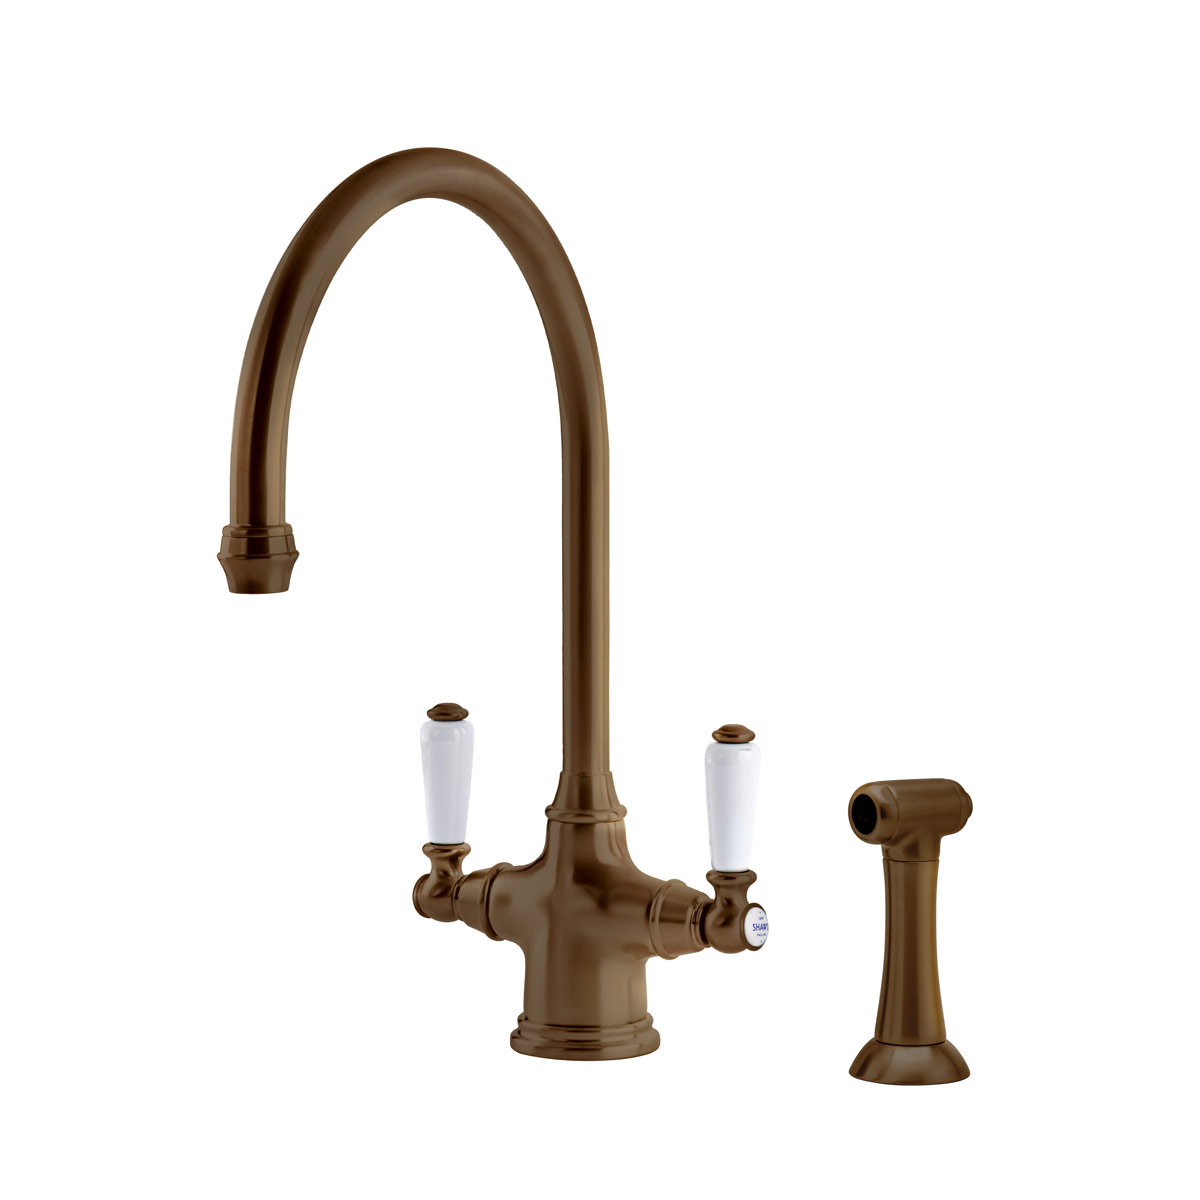 Shaws by Perrin & Rowe Ribble kitchen mixer with spray rinse in English Bronze. Phoenician style monobloc kitchen tap AUSH.4360. Distributed in Australia by Luxe by Design, Brisbane.